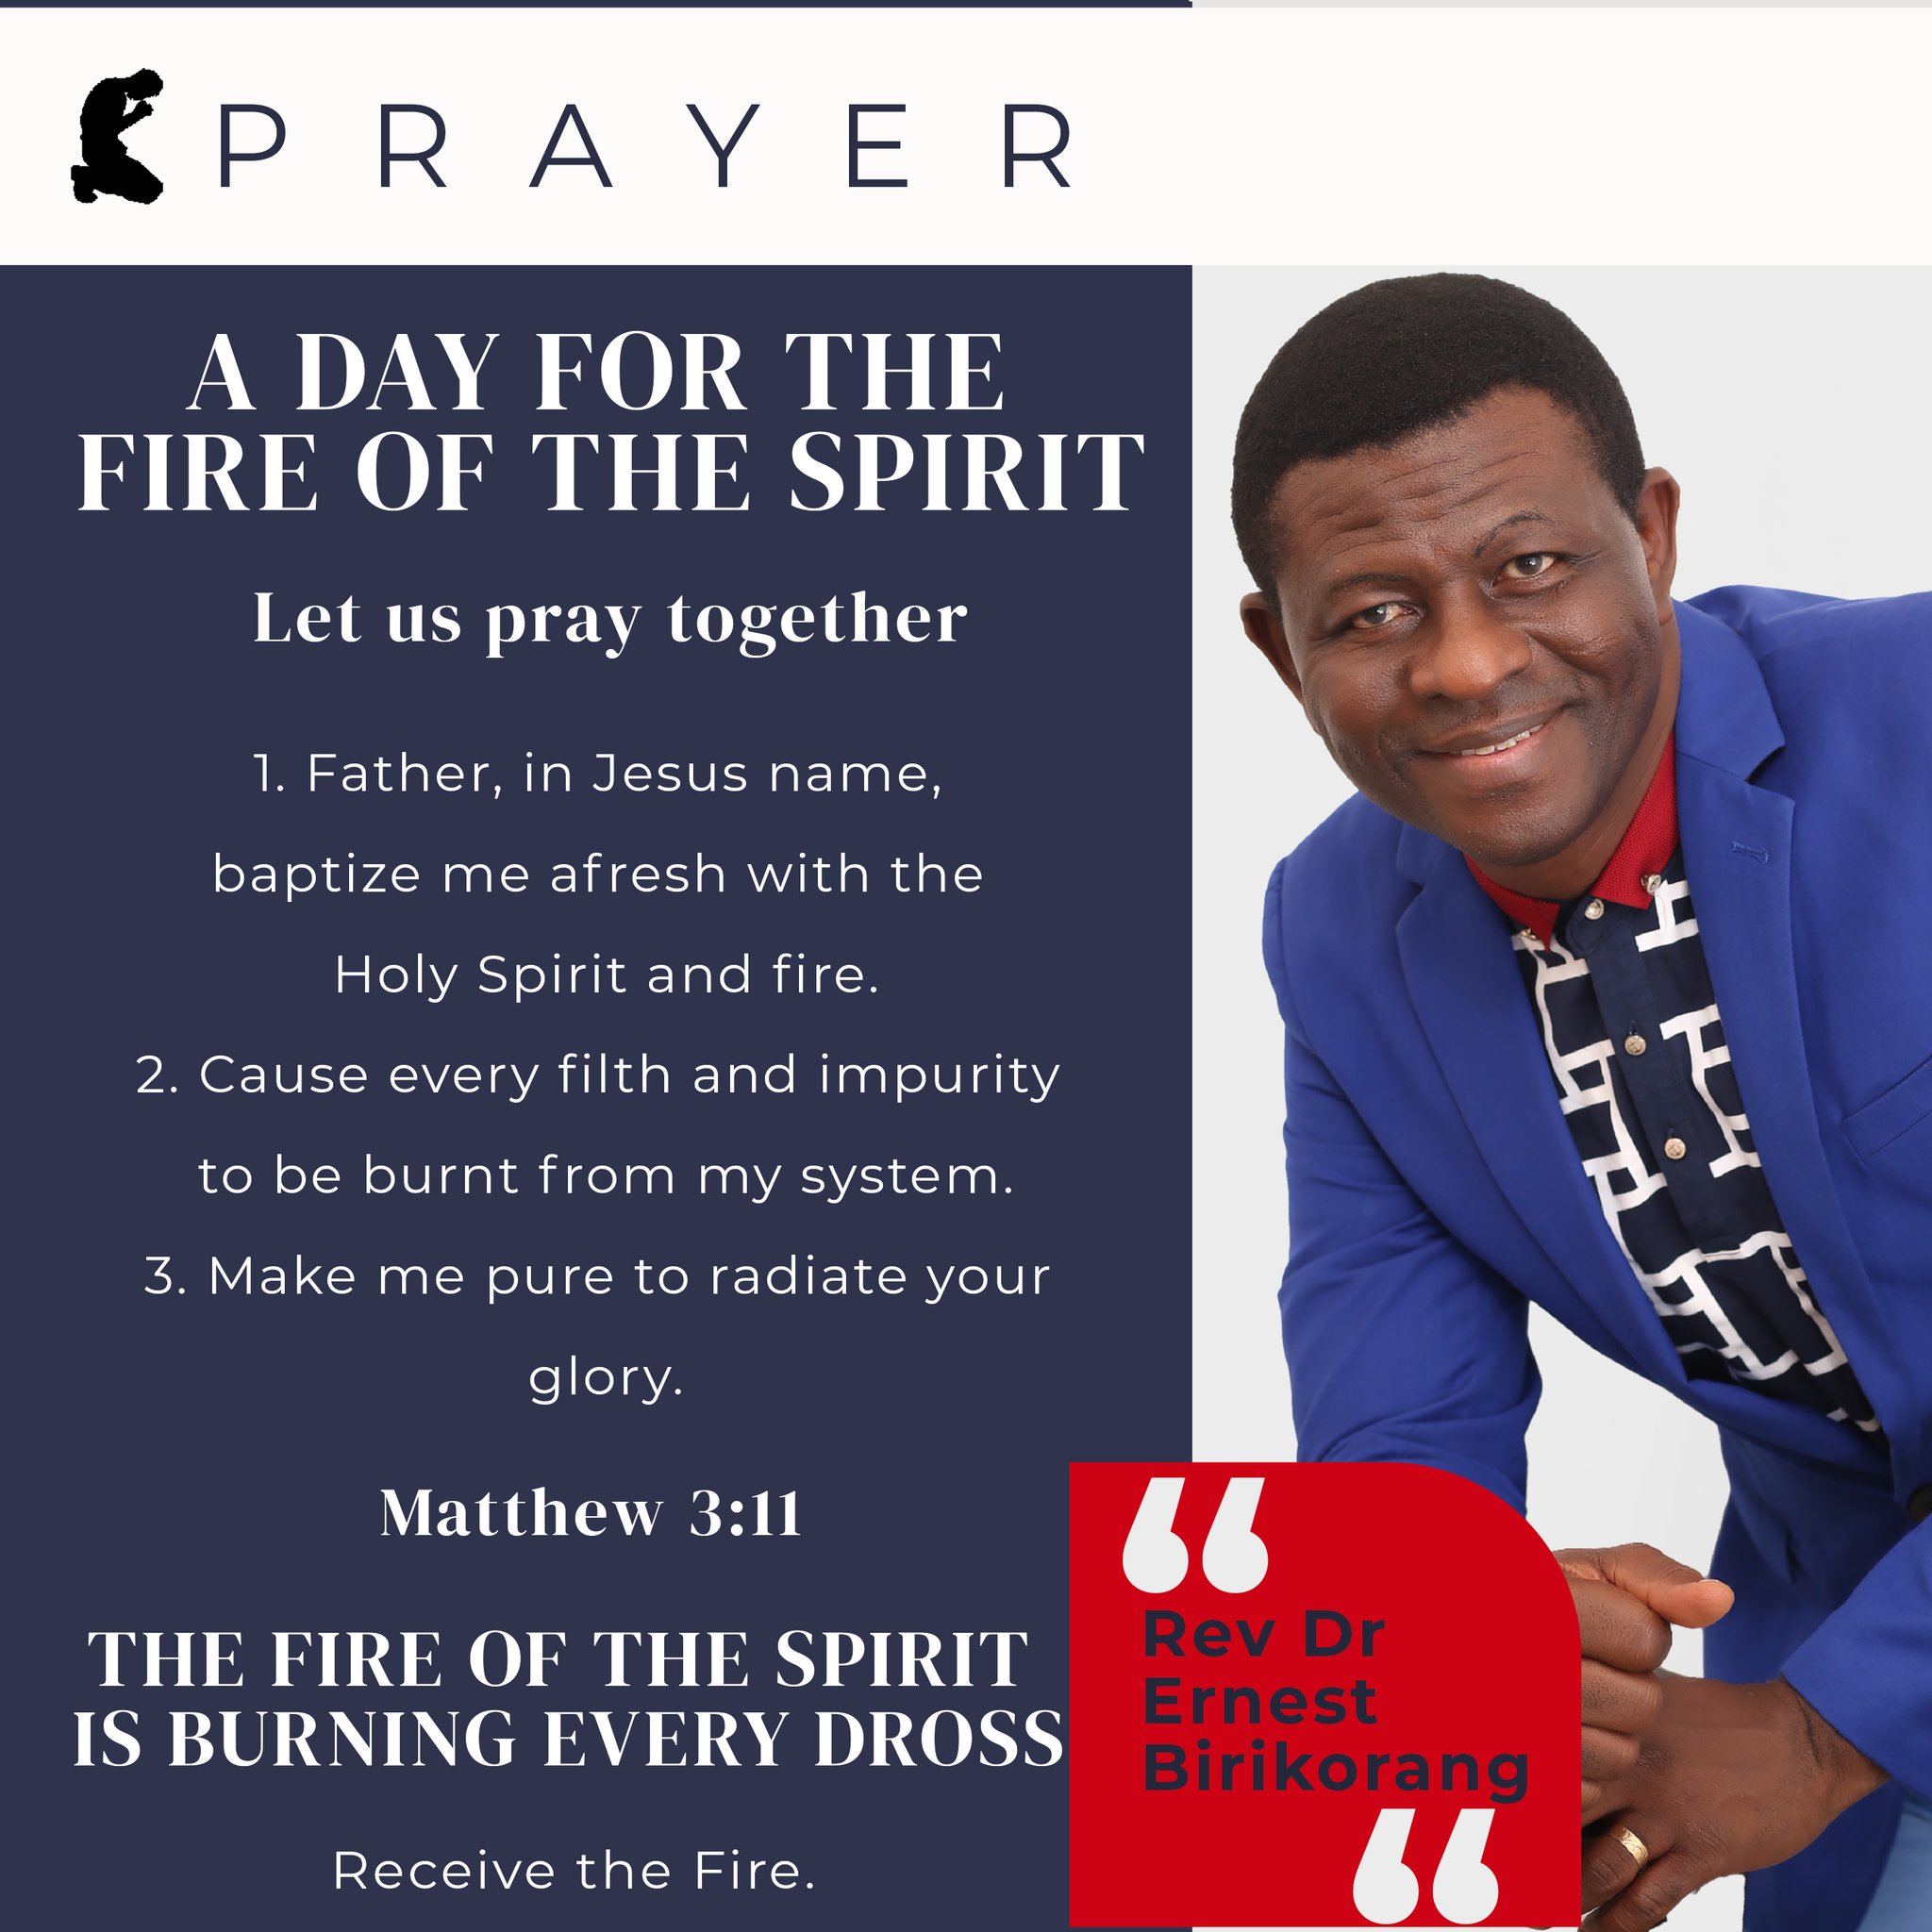 €P R A Y E R DAY FOR THE FIRE OF THE SPIRIT Let Us pray together 1. Father; in Jesus name; baptize me afresh with the Holy Spirit and fire. 2. Cause every filth and impurity to be burnt from my system_ 3. Make me pure to radiate your glory: Matthew 3:41 THE FIRE OF THE SPIRIT Rev Pr Errest IS BURNING EVERY DROSS Birikorang Receive the Fire.